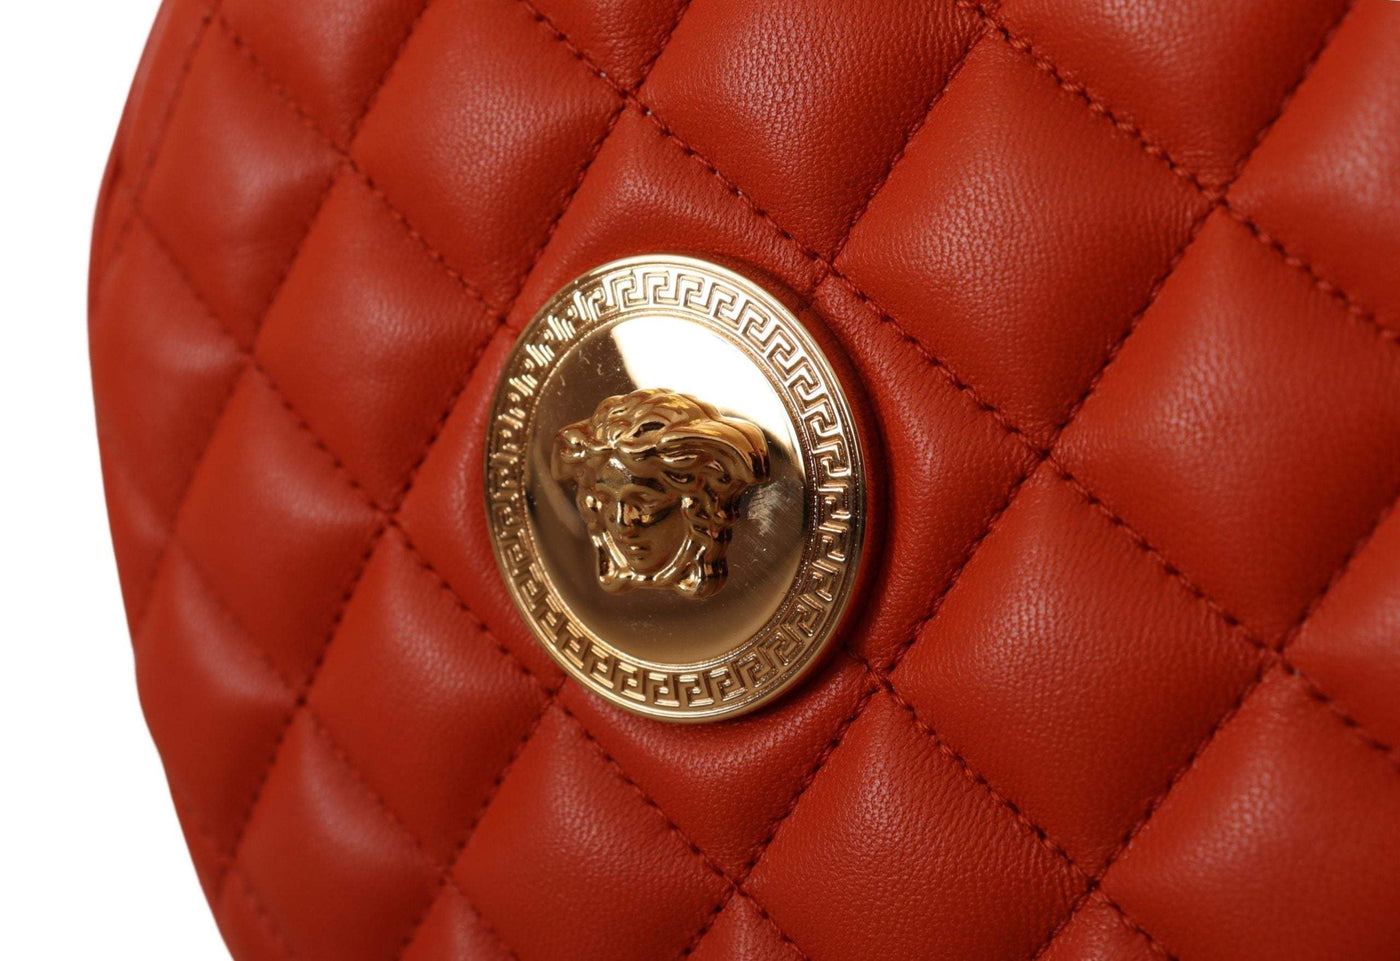 Versace Red Nappa Leather Medusa Round Crossbody Bag Crossbody Bags - Women - Bags, feed-1, Red, Shoulder Bags - Women - Bags, Versace, Women - New Arrivals at SEYMAYKA